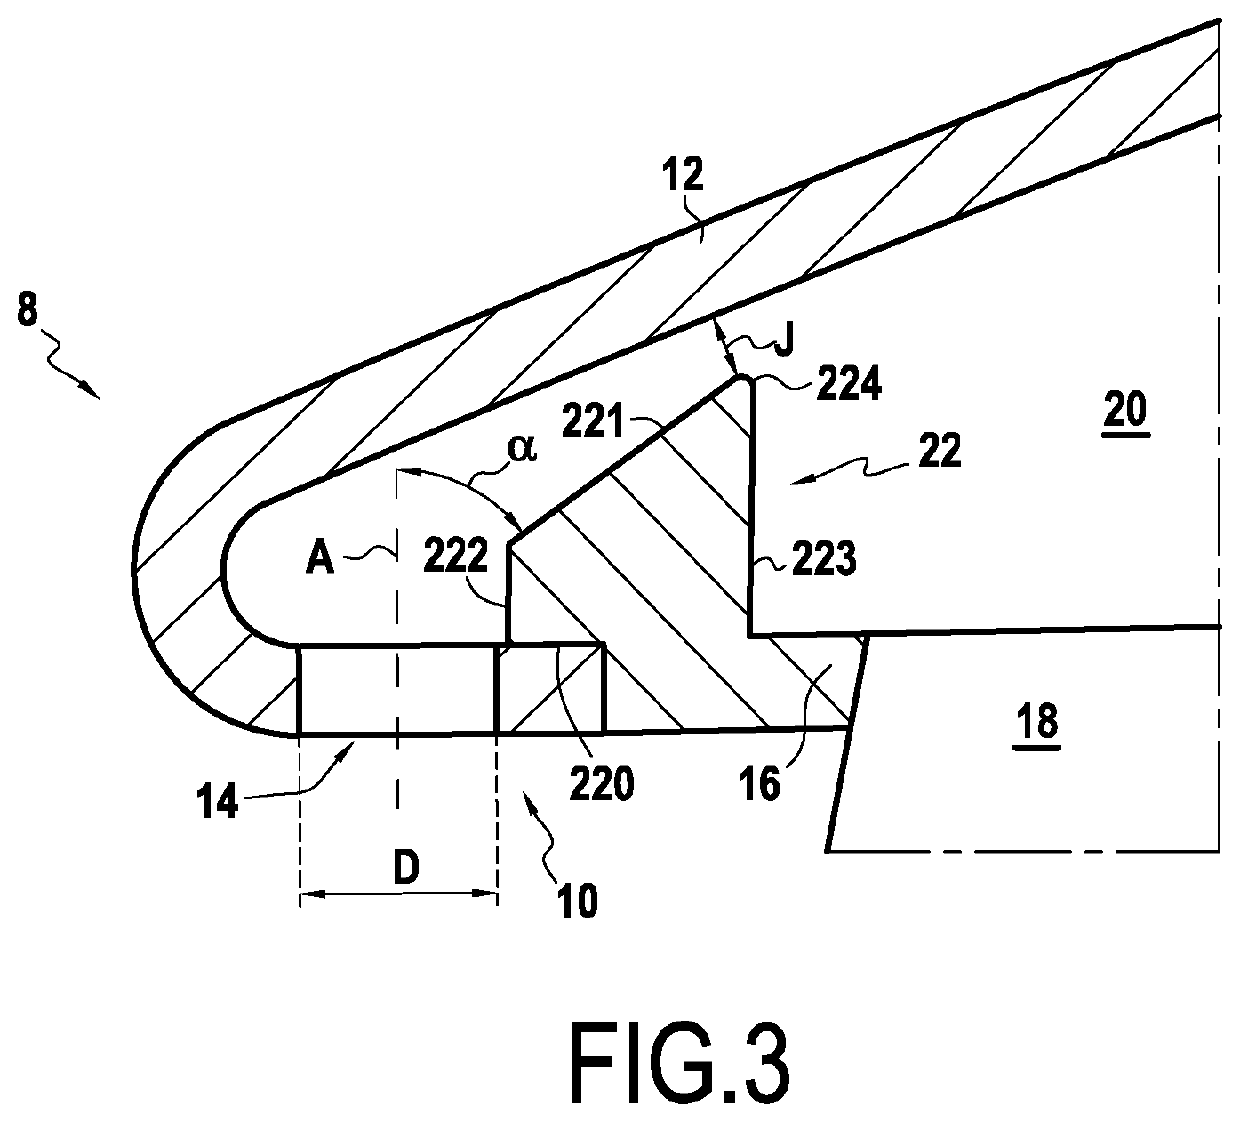 Device for deicing a splitter nose and inlet guide vanes of an aviation turbine engine